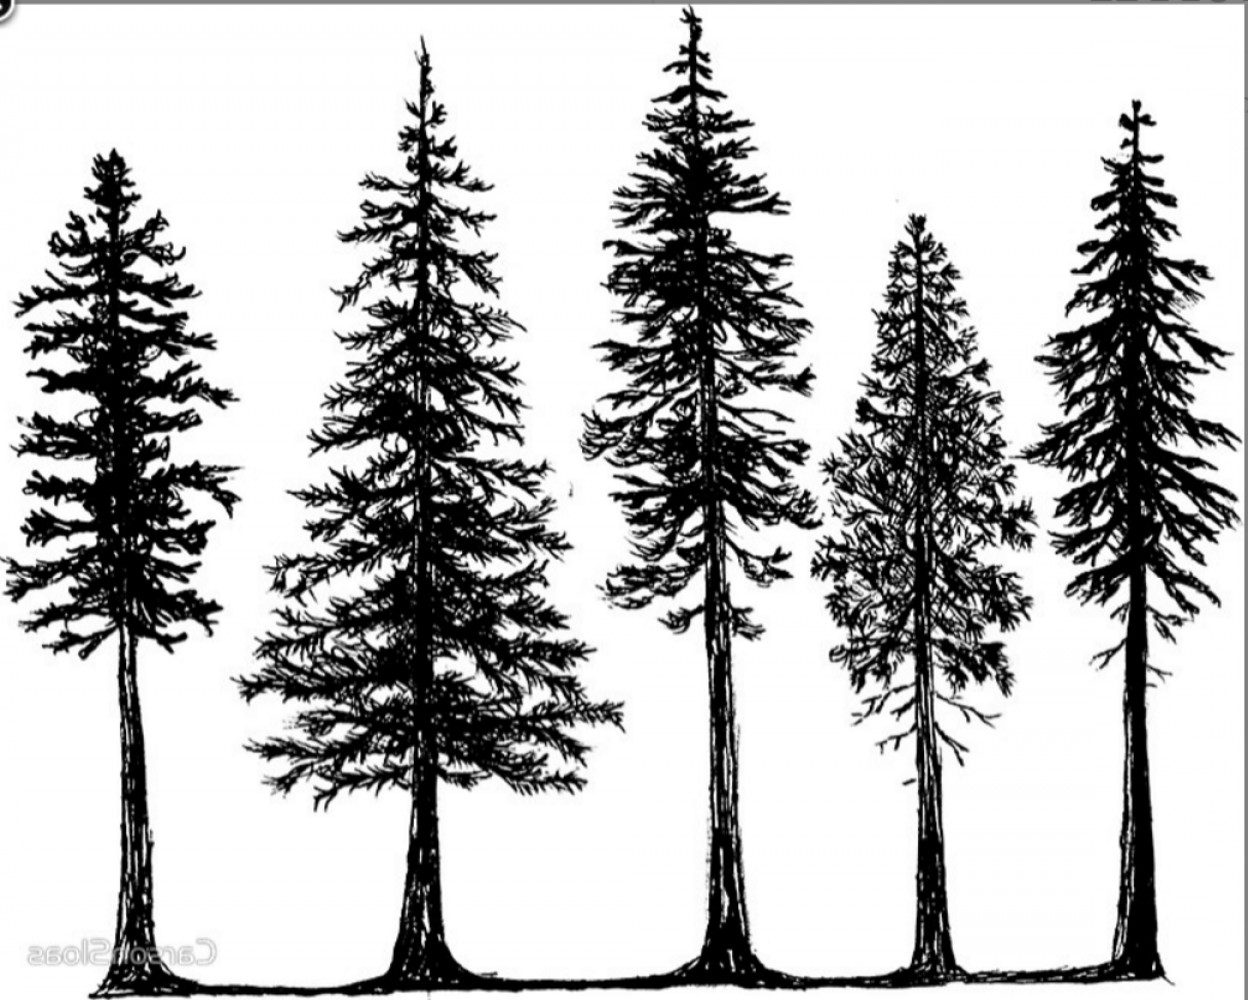 Download Treeline Silhouette Vector at Vectorified.com | Collection of Treeline Silhouette Vector free ...